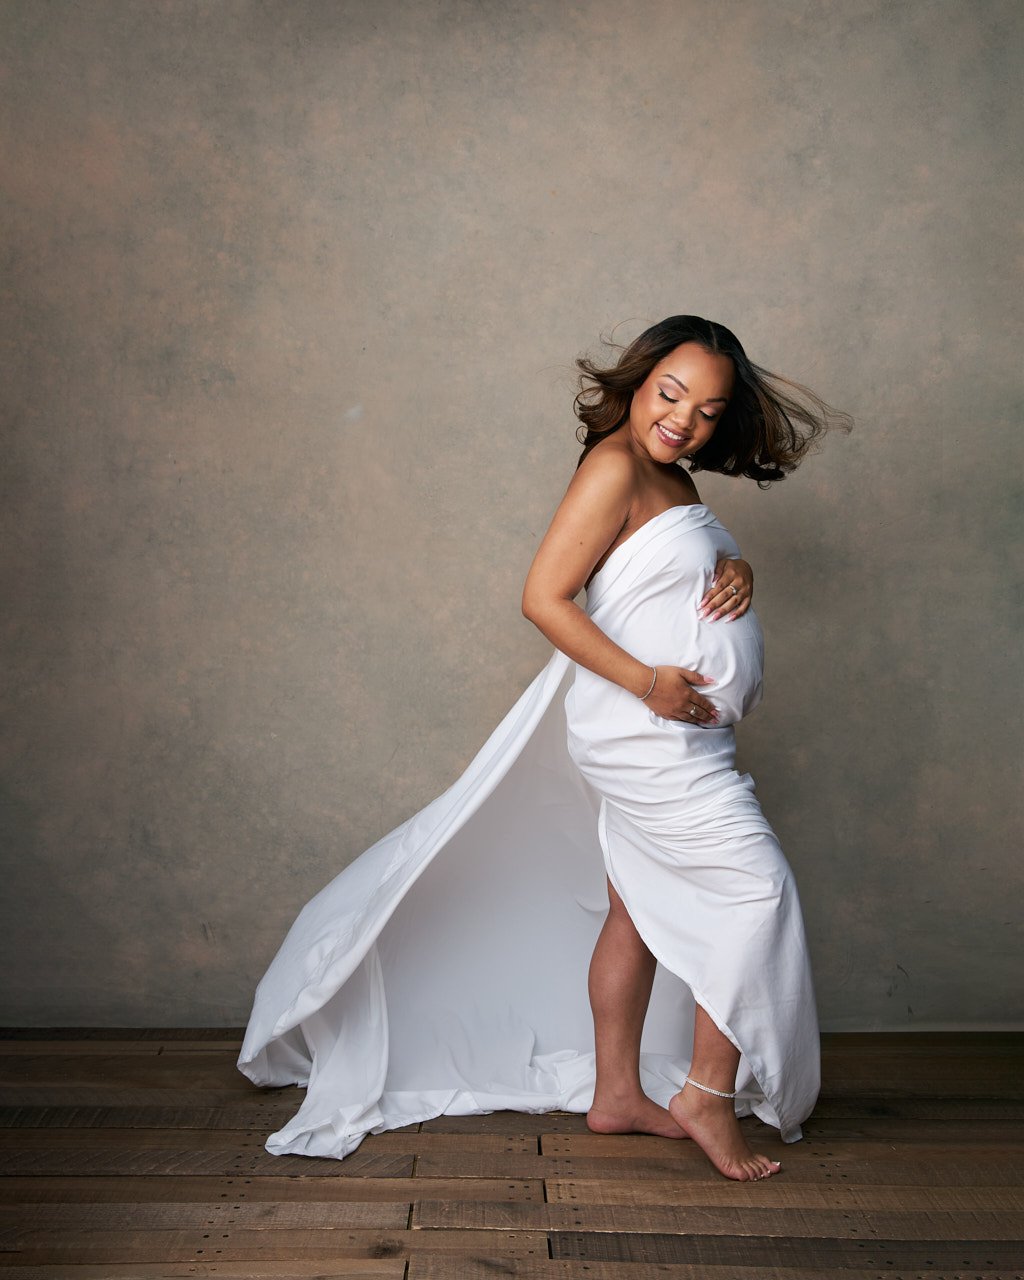 Maternity portrait of pregnant woman of color in flowing white fabric maternity outfit. Maternity portrait photographer near Washington DC  Portraits by Jared Wolfe in Alexandria VA